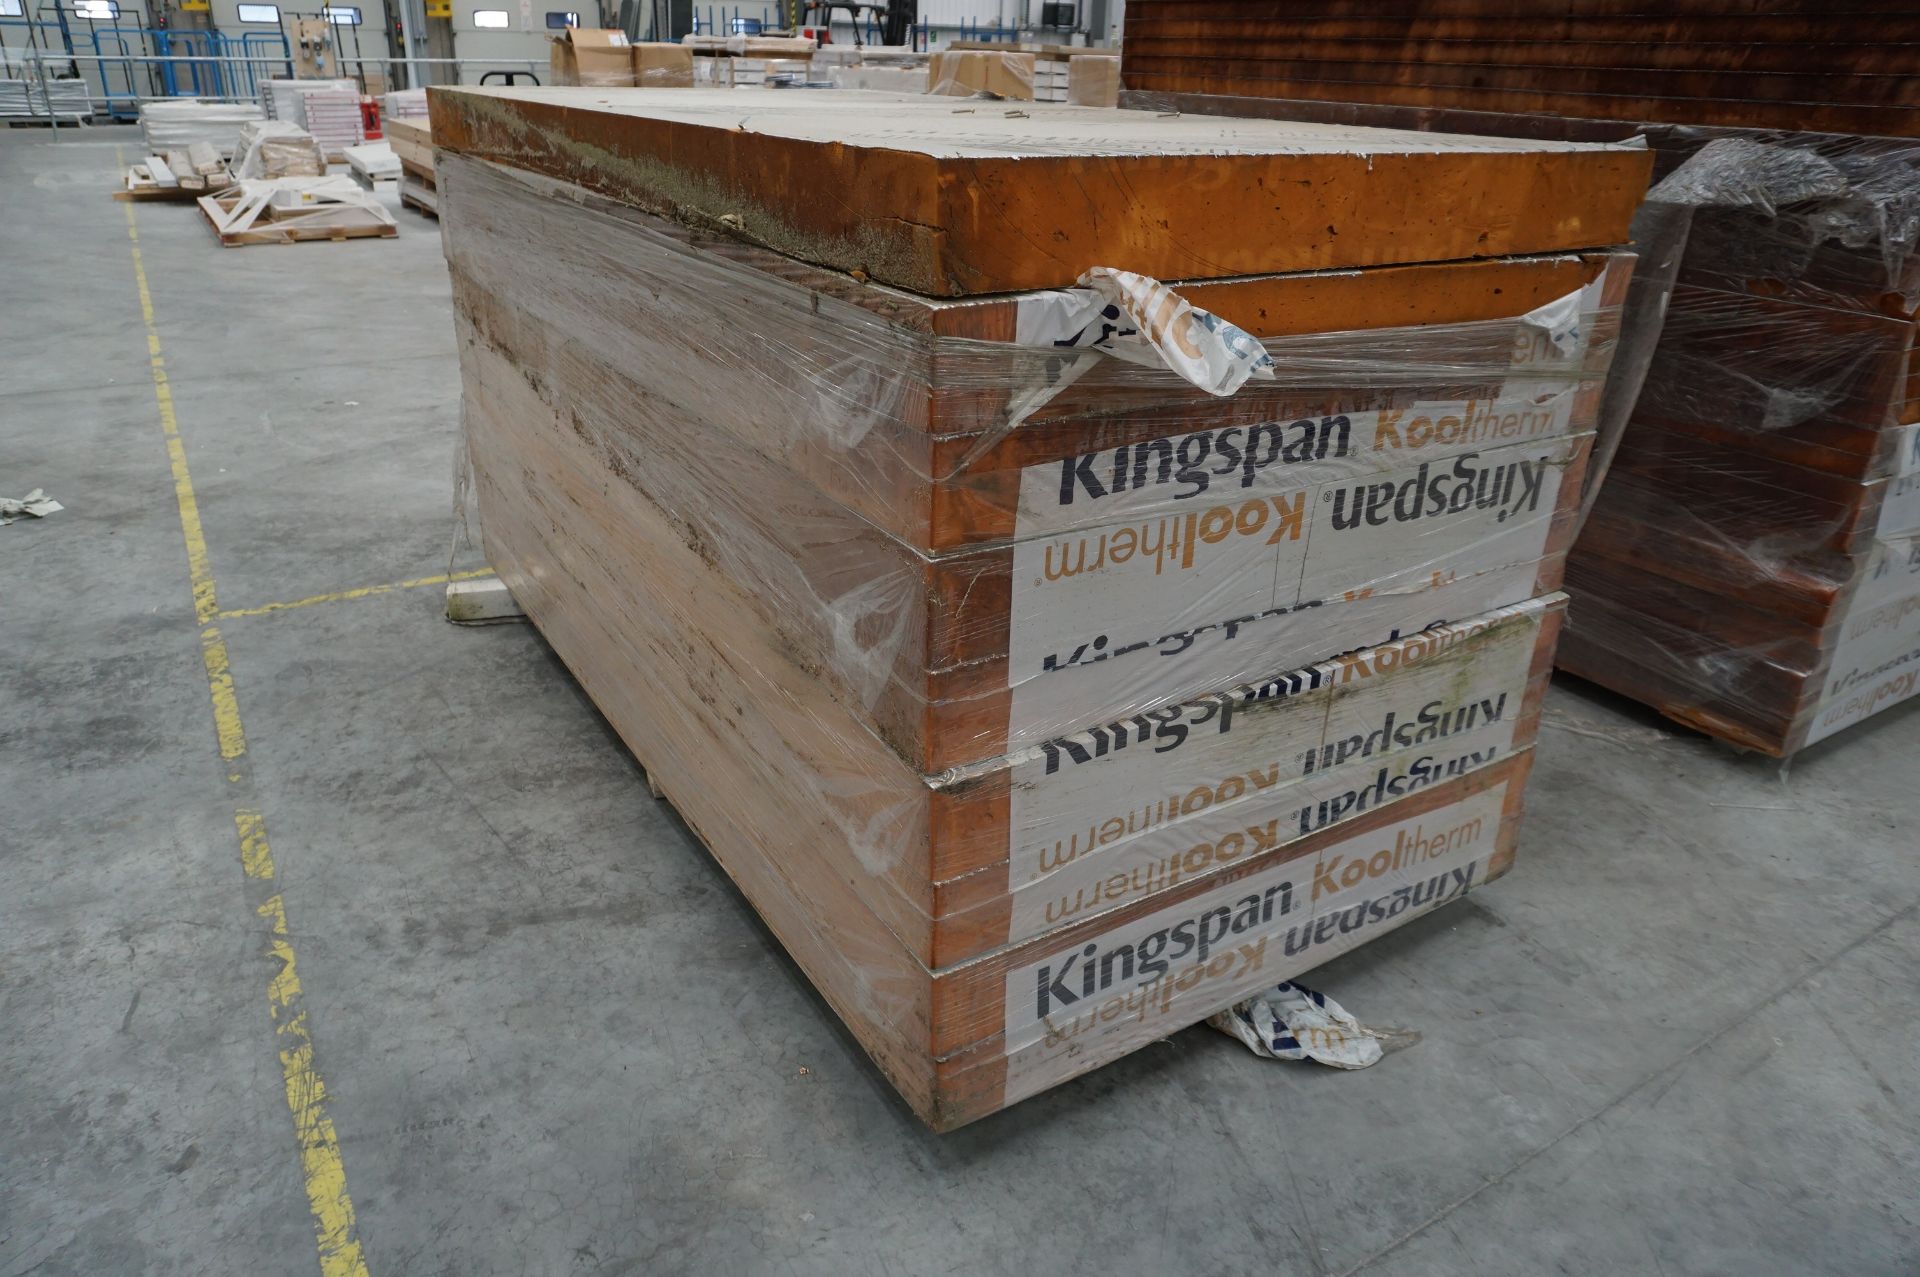 Kingspan, Kooltherm K112 framing insulation board, 1200 x 2400 x 130mm, 4 packs of 2 boards - Image 2 of 4